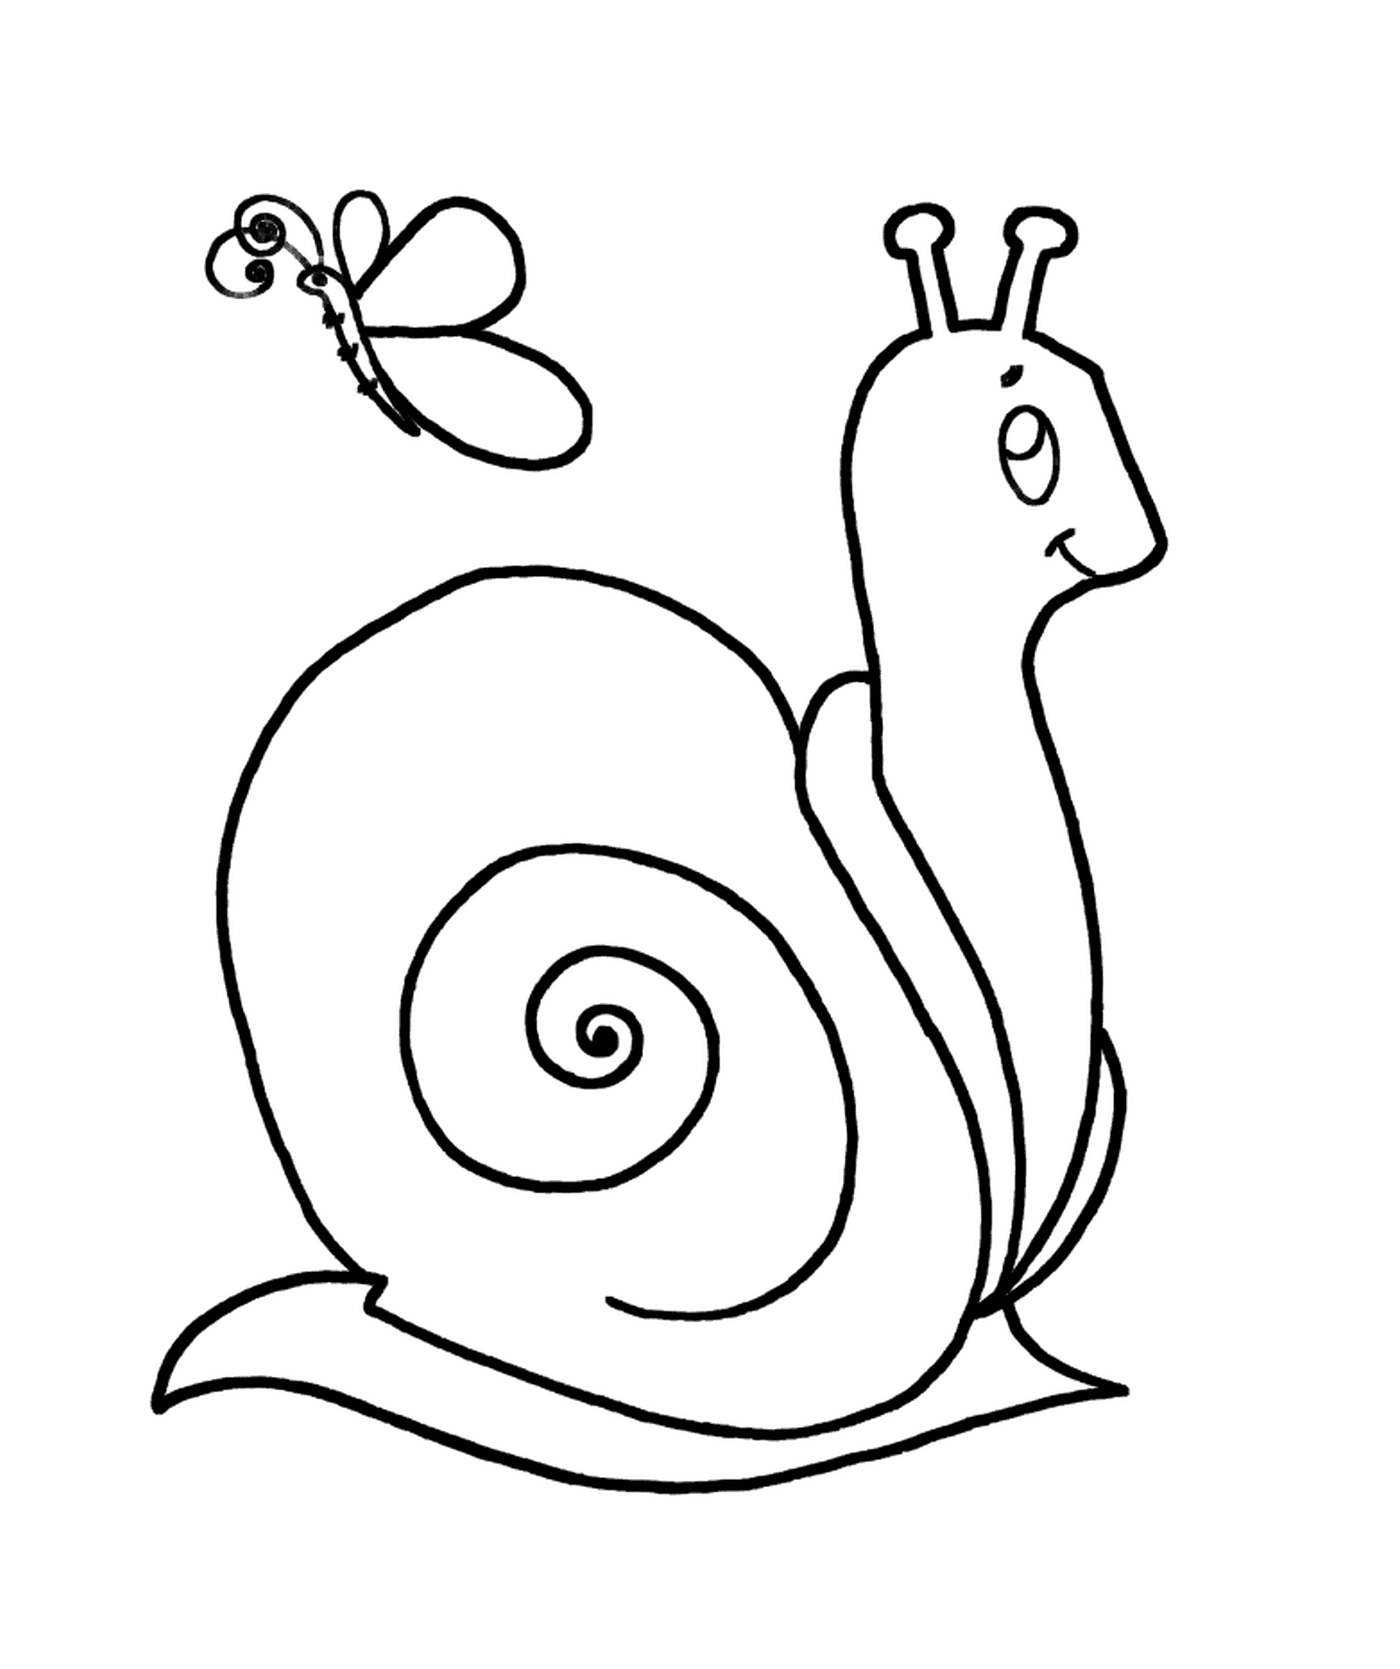  A snail and a butterfly 